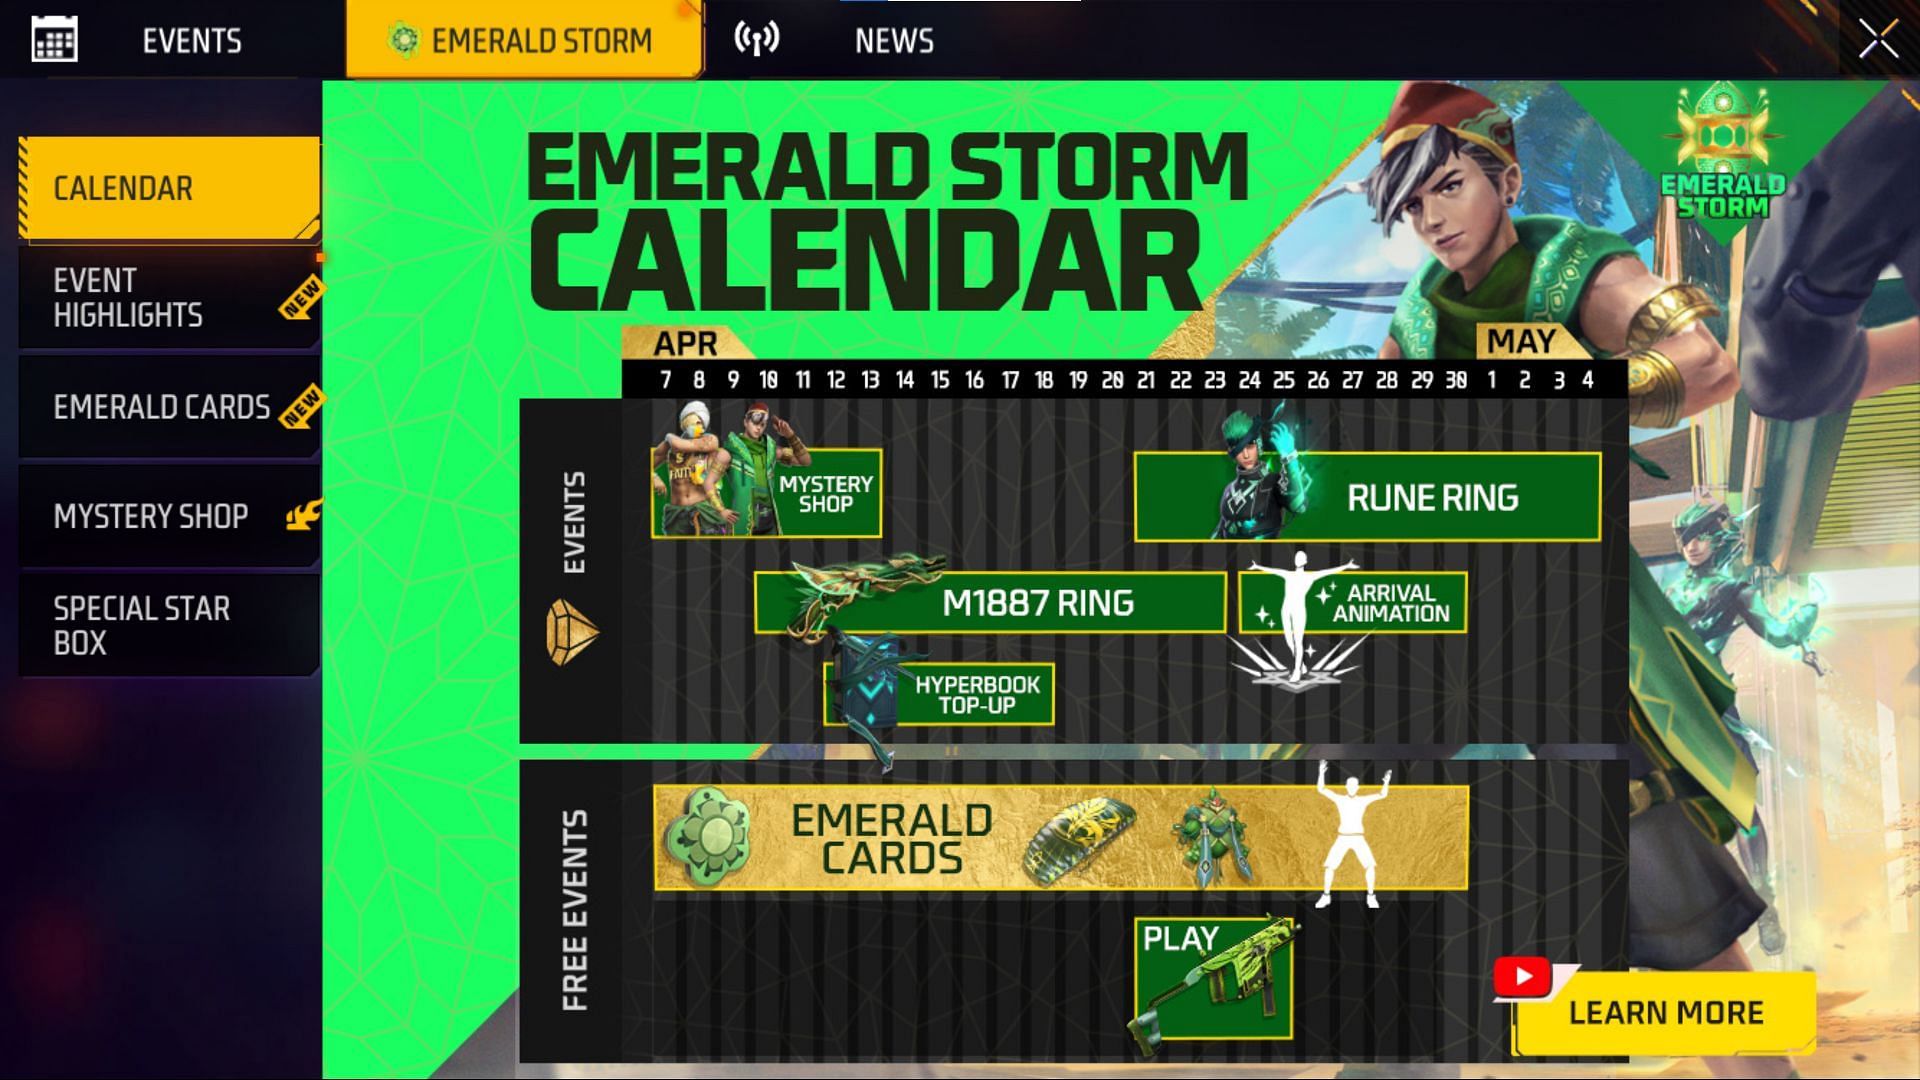 Here is the calendar of events that will take place in line with the Emerald Storm (Image via Garena)